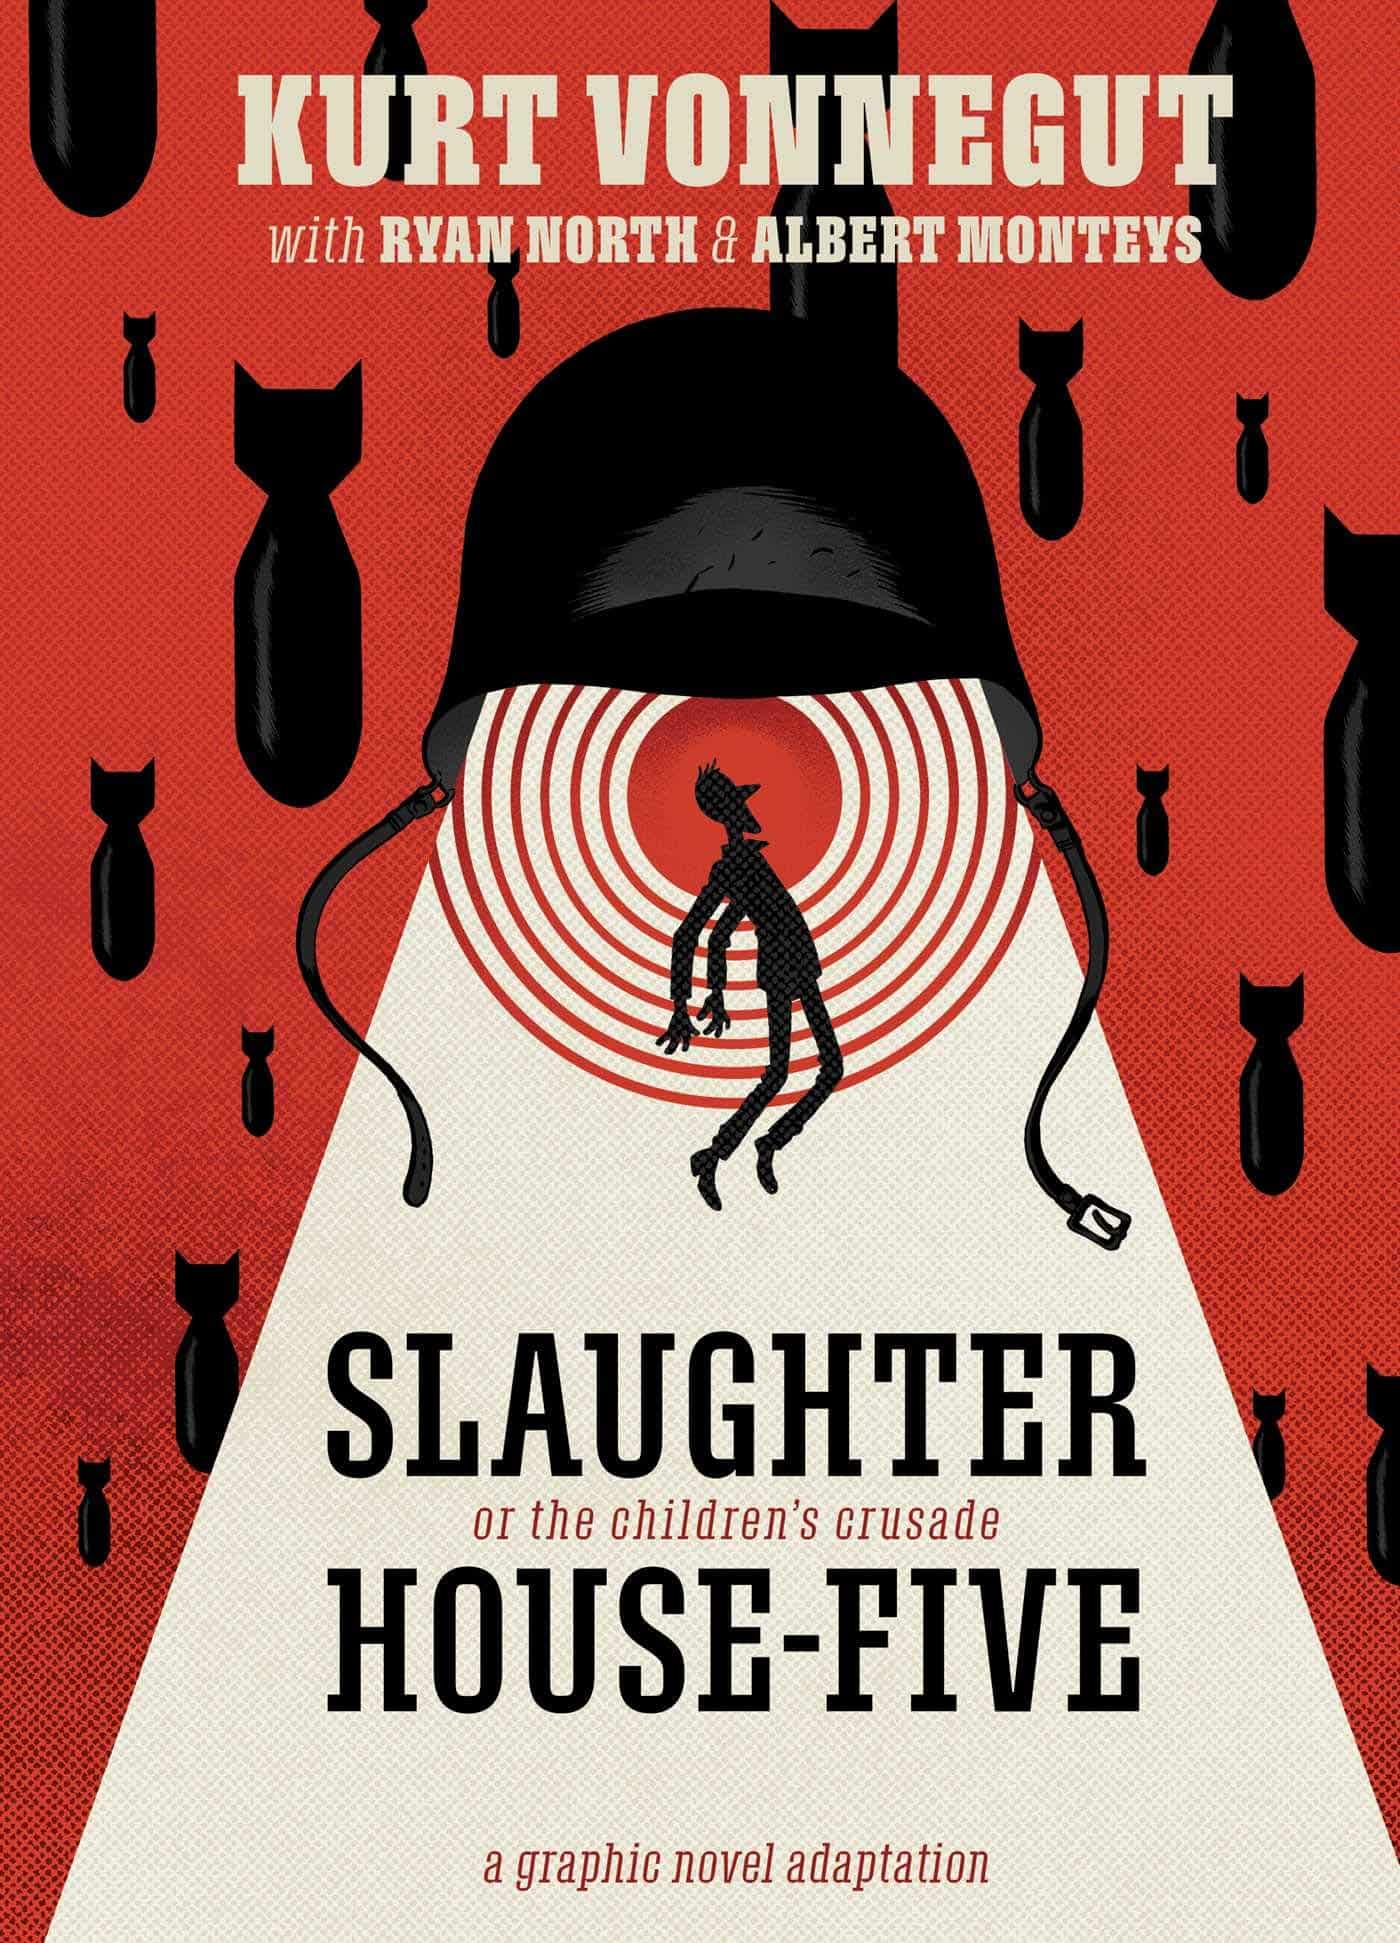 Slaughterhouse-5 by Kurt Vonnegut book cover, shows bombs being dropped from a red sky, while a man is being dropped from a war helmet like spotlight.